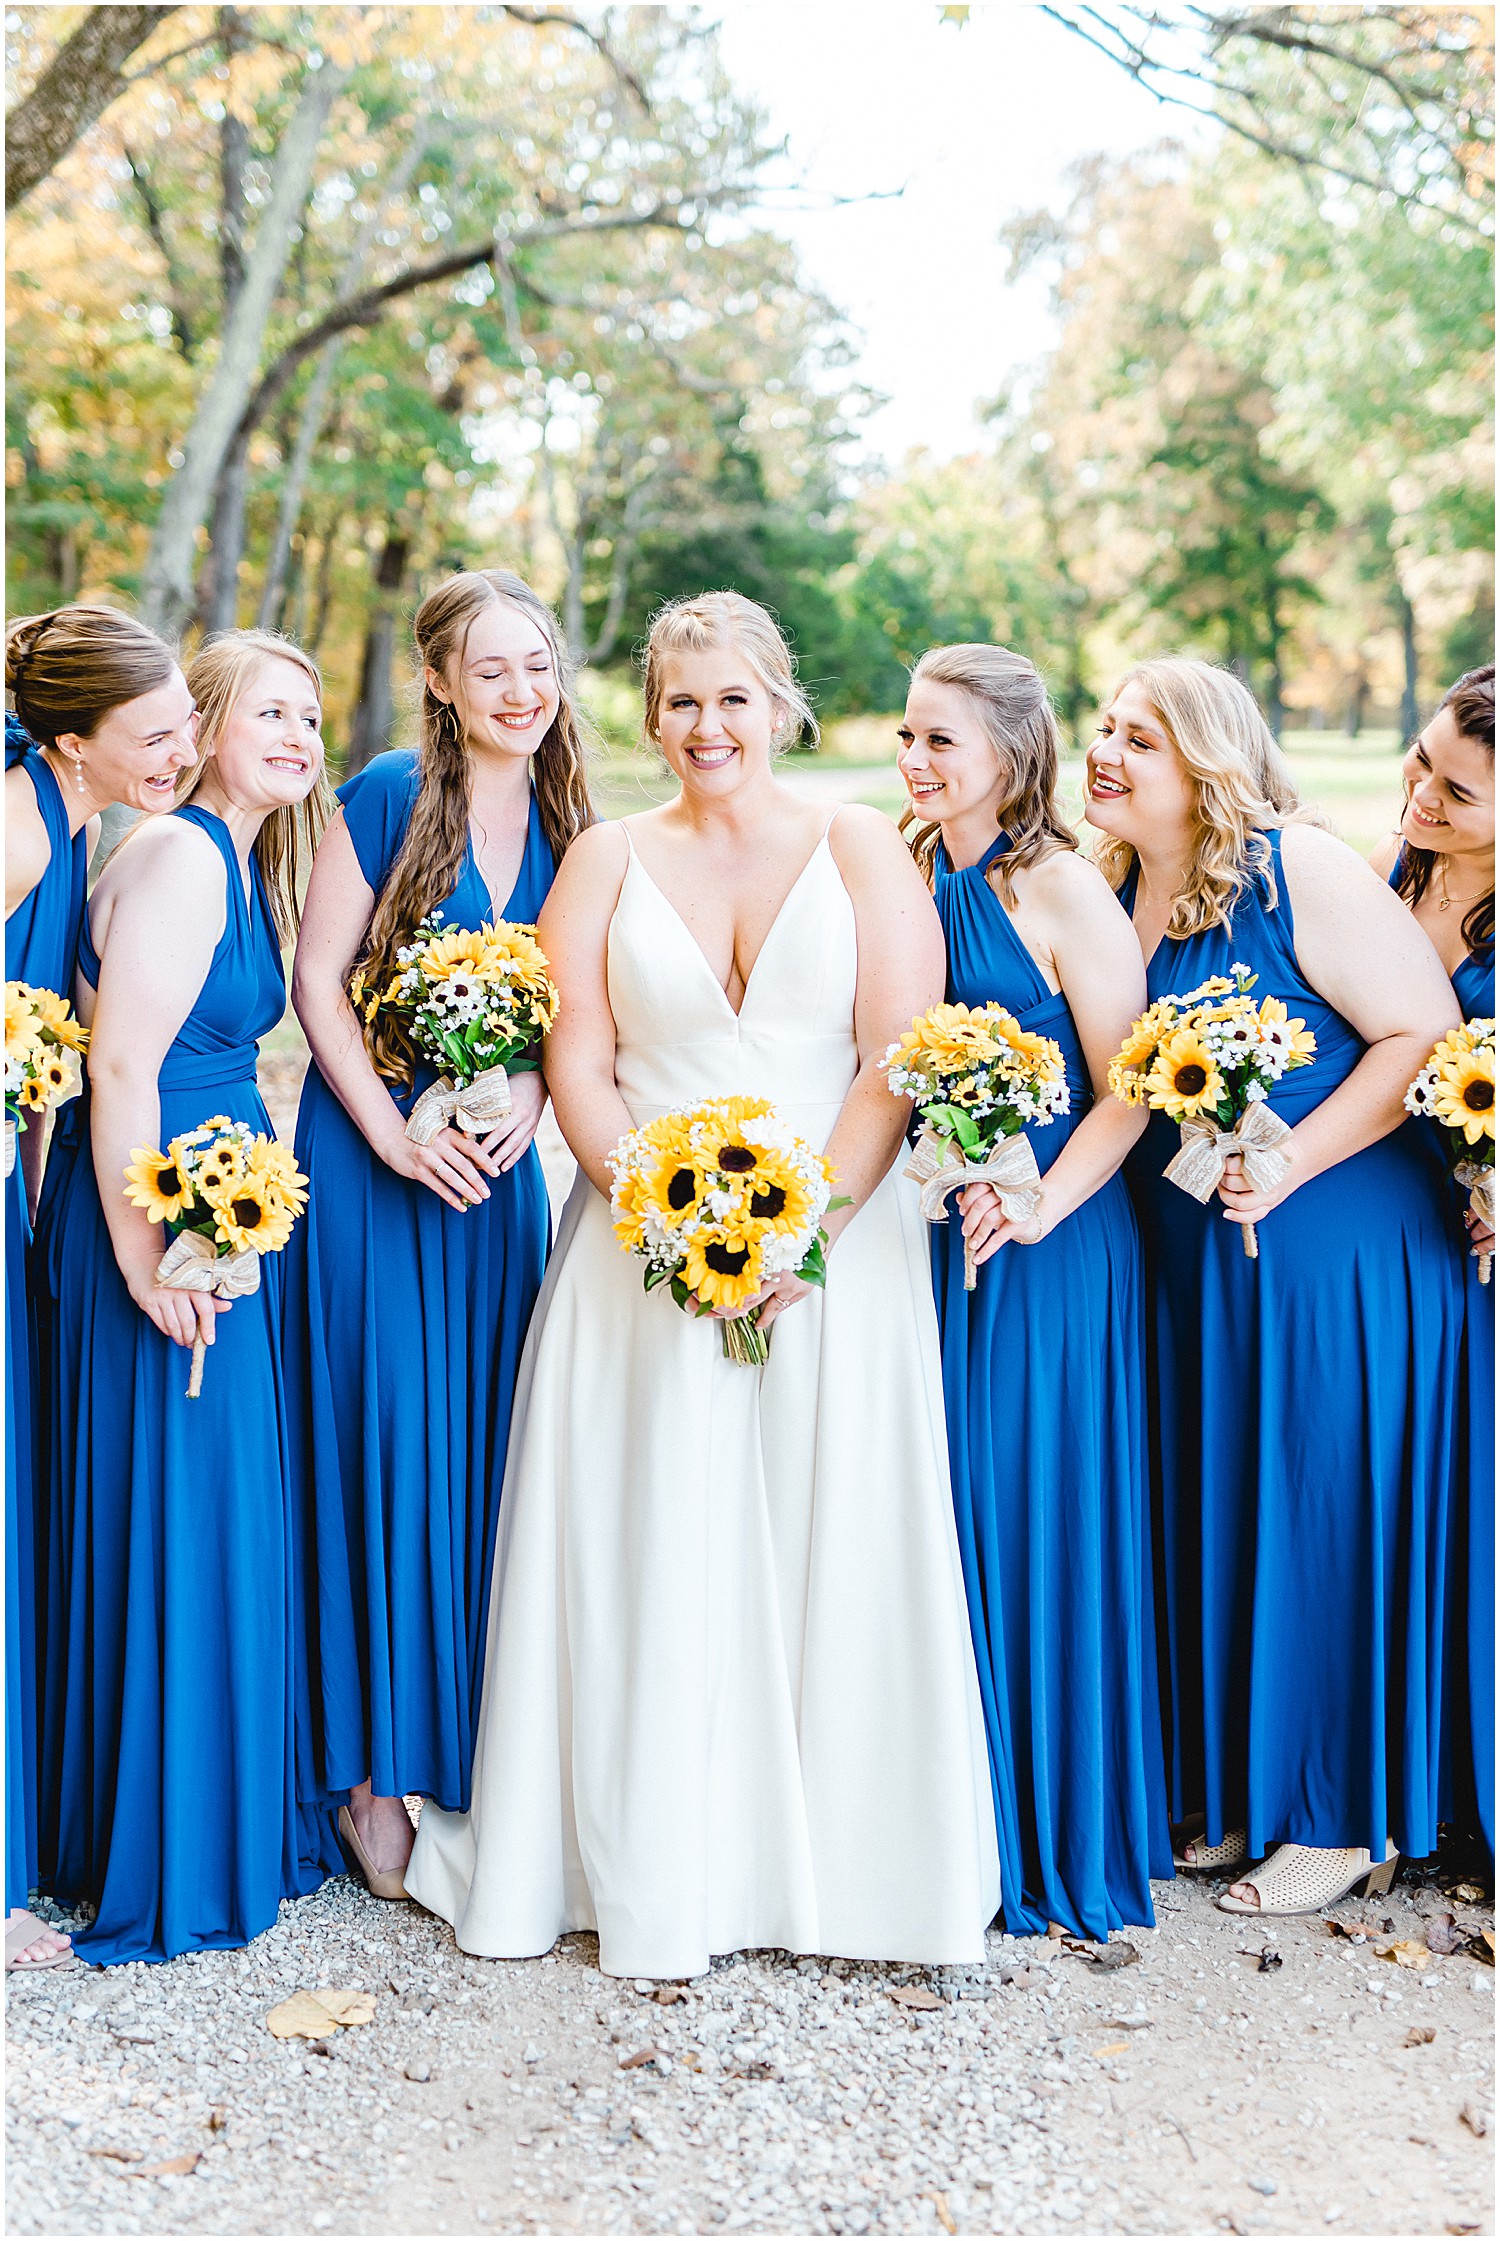 bride and bridesmaids smile at each other while holding sunflower bouquets